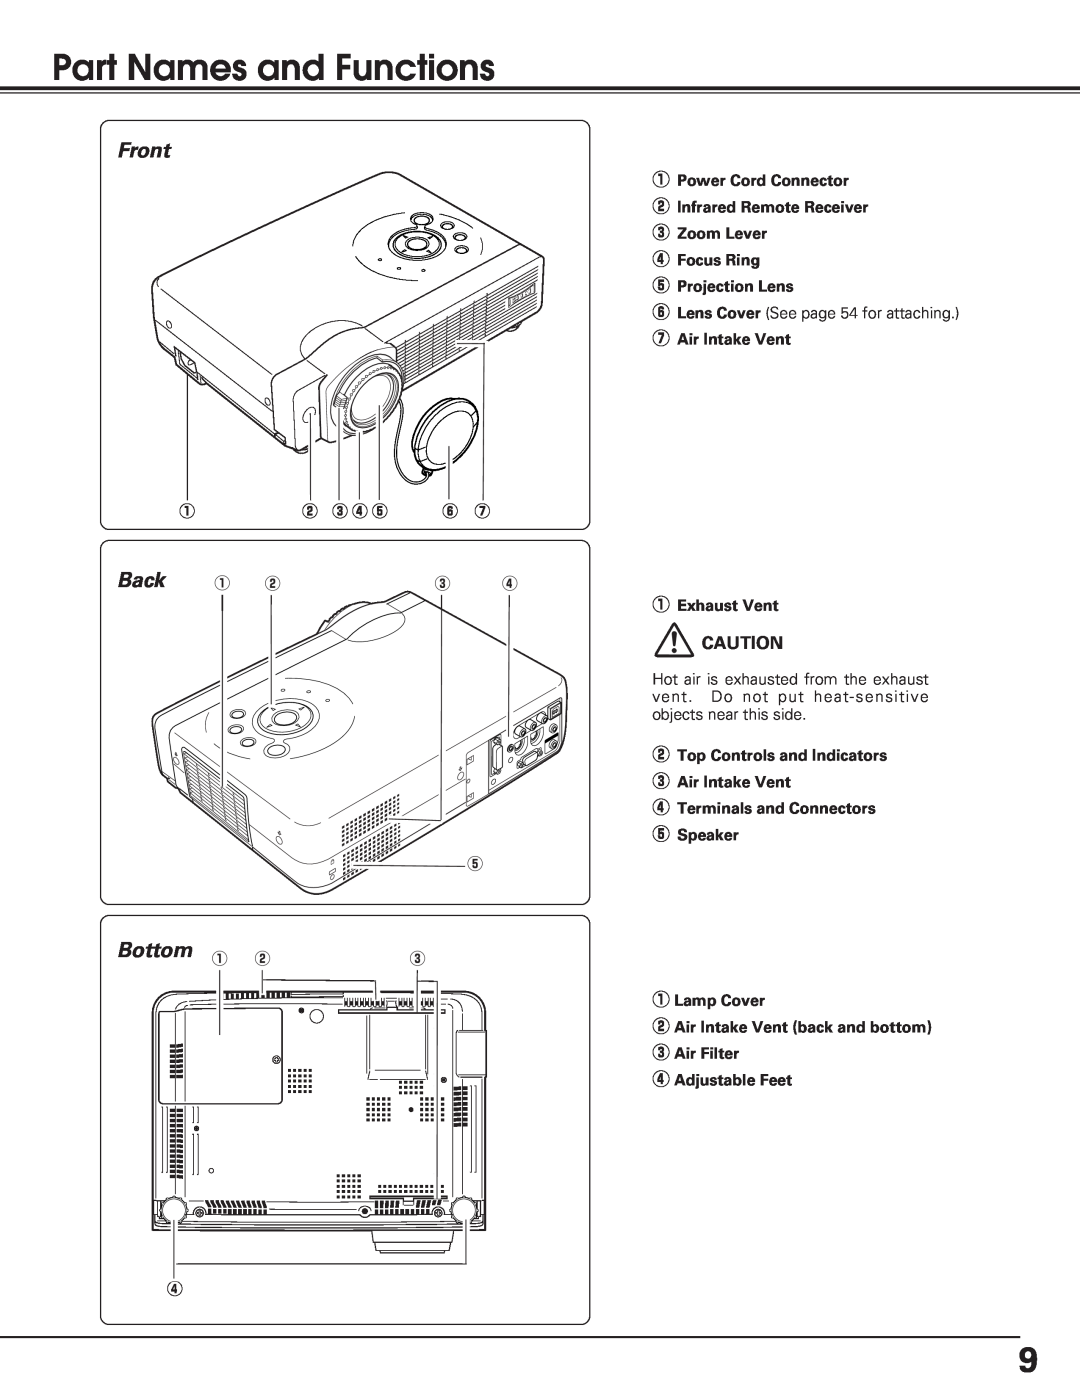 Eiki lc-sb15 owner manual Part Names and Functions, Front, Back, Bottom 